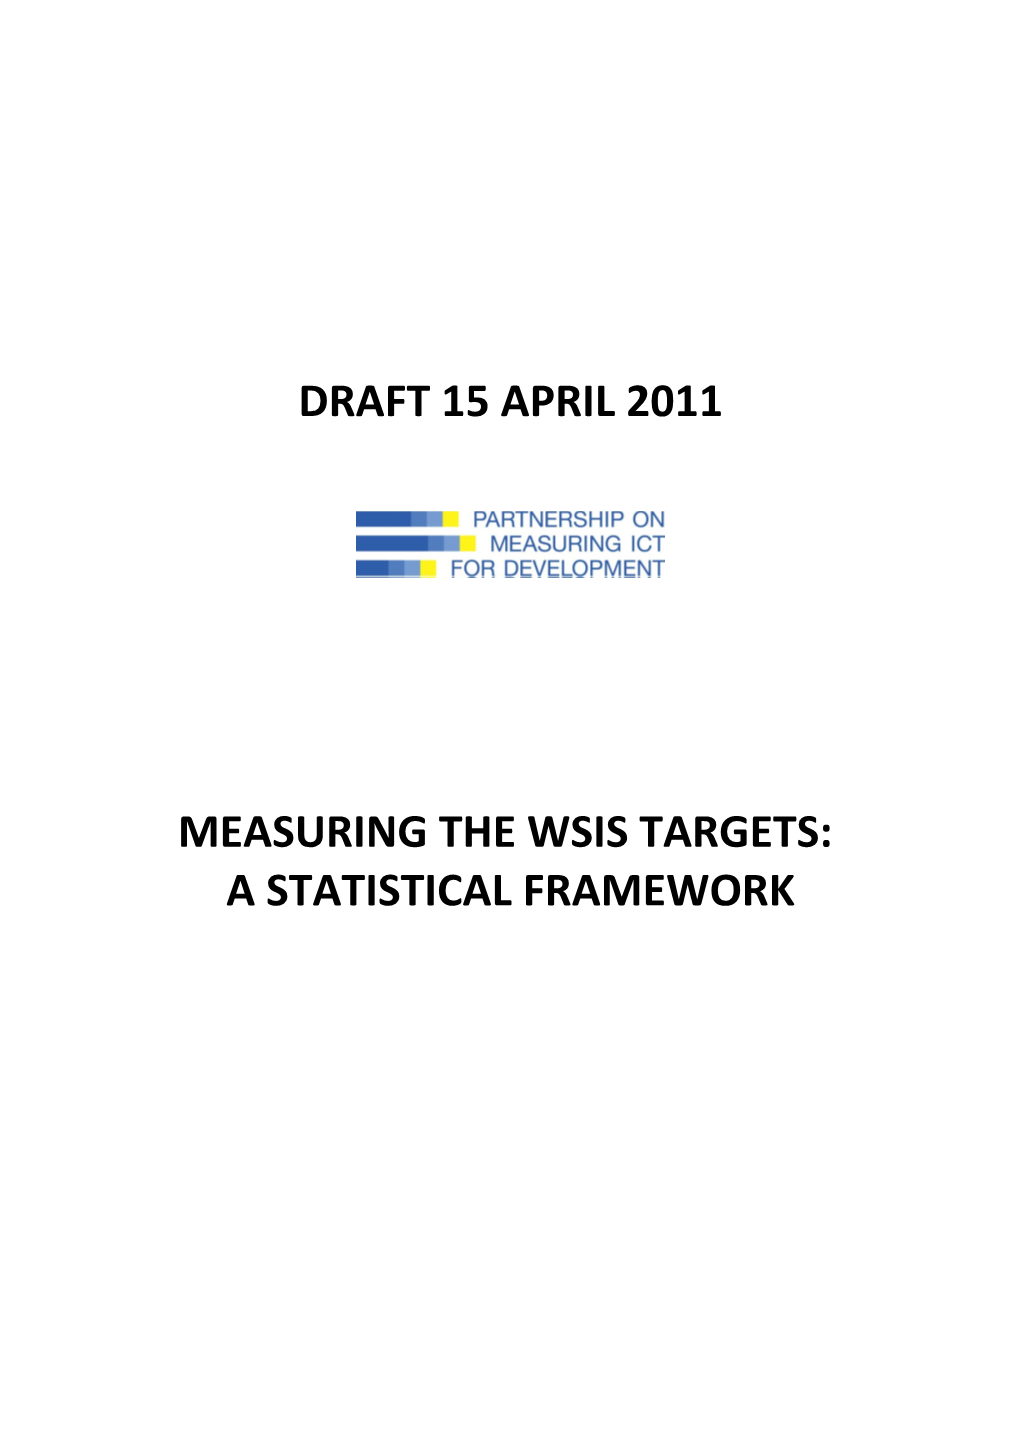 Measuring the WSIS Targets: a Statistical Framework